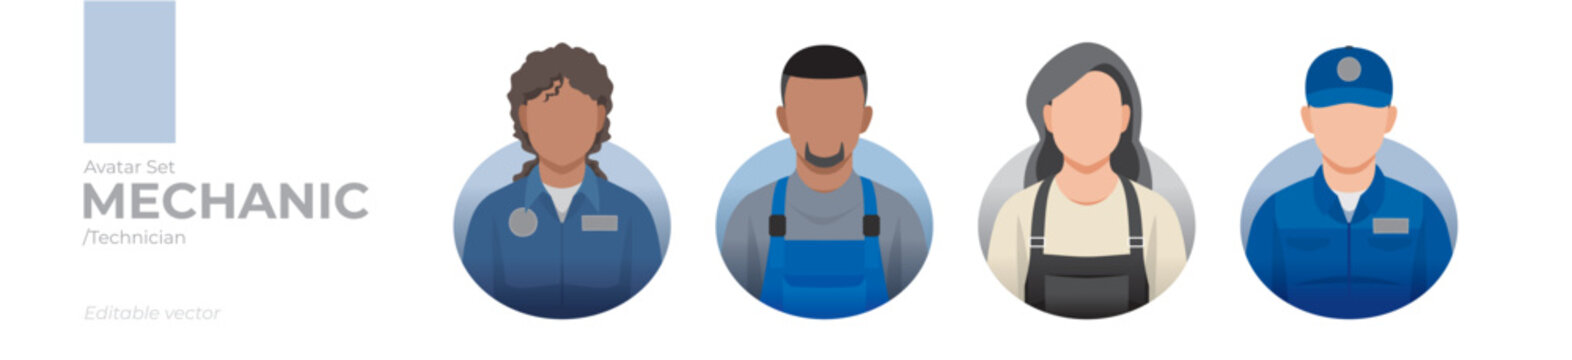 Mechanic picture avatar icons. Illustration of men and women wearing worker apron and overall outfit